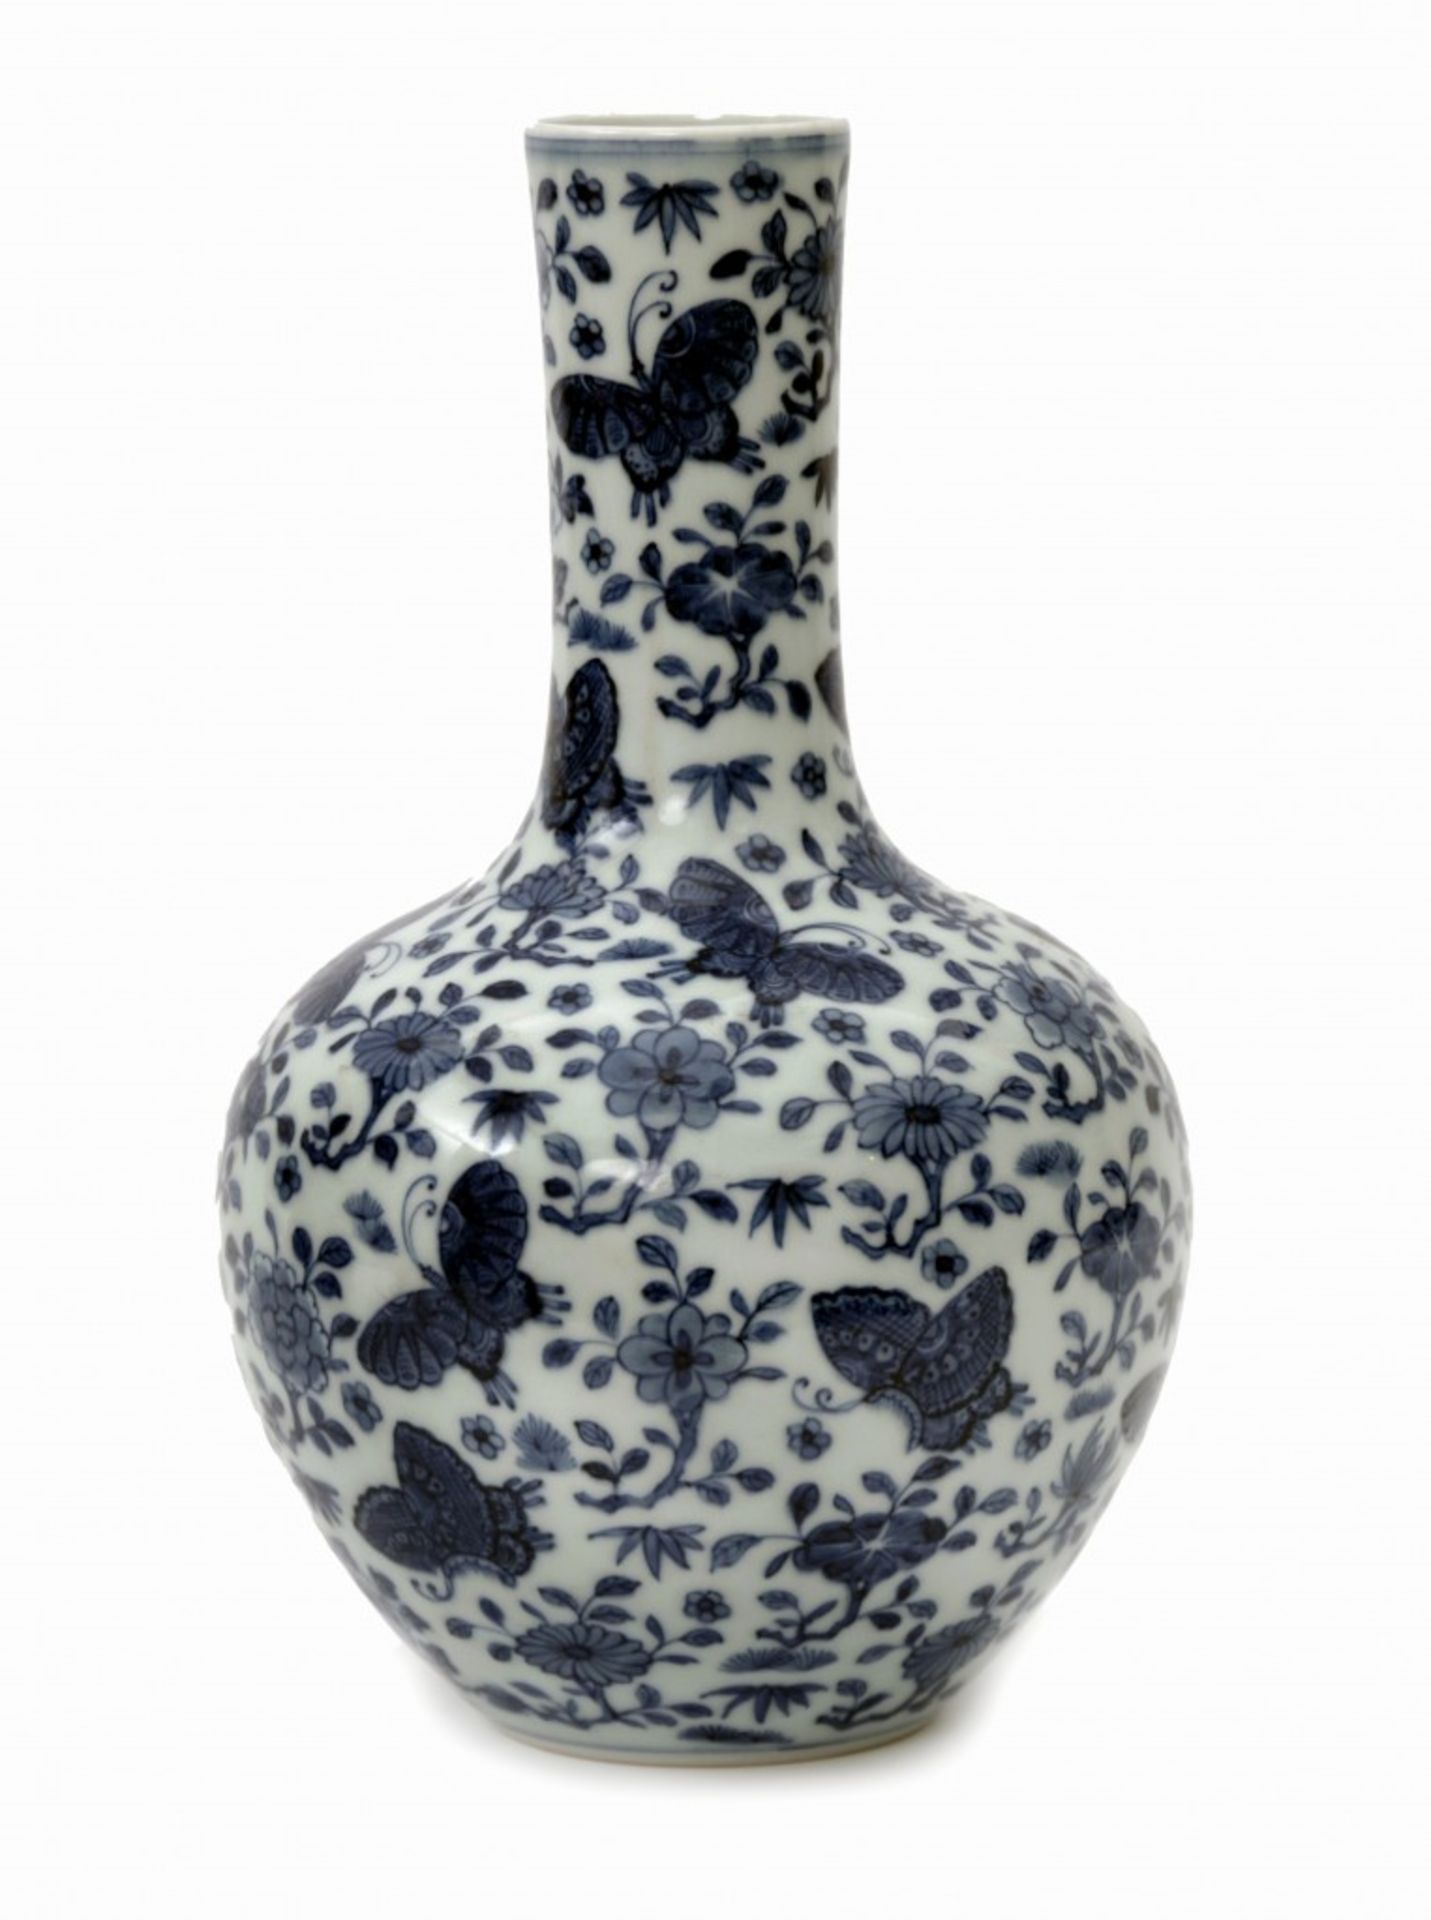 A Narrow Necked Vase with Decoration of Butterflies and Flowers